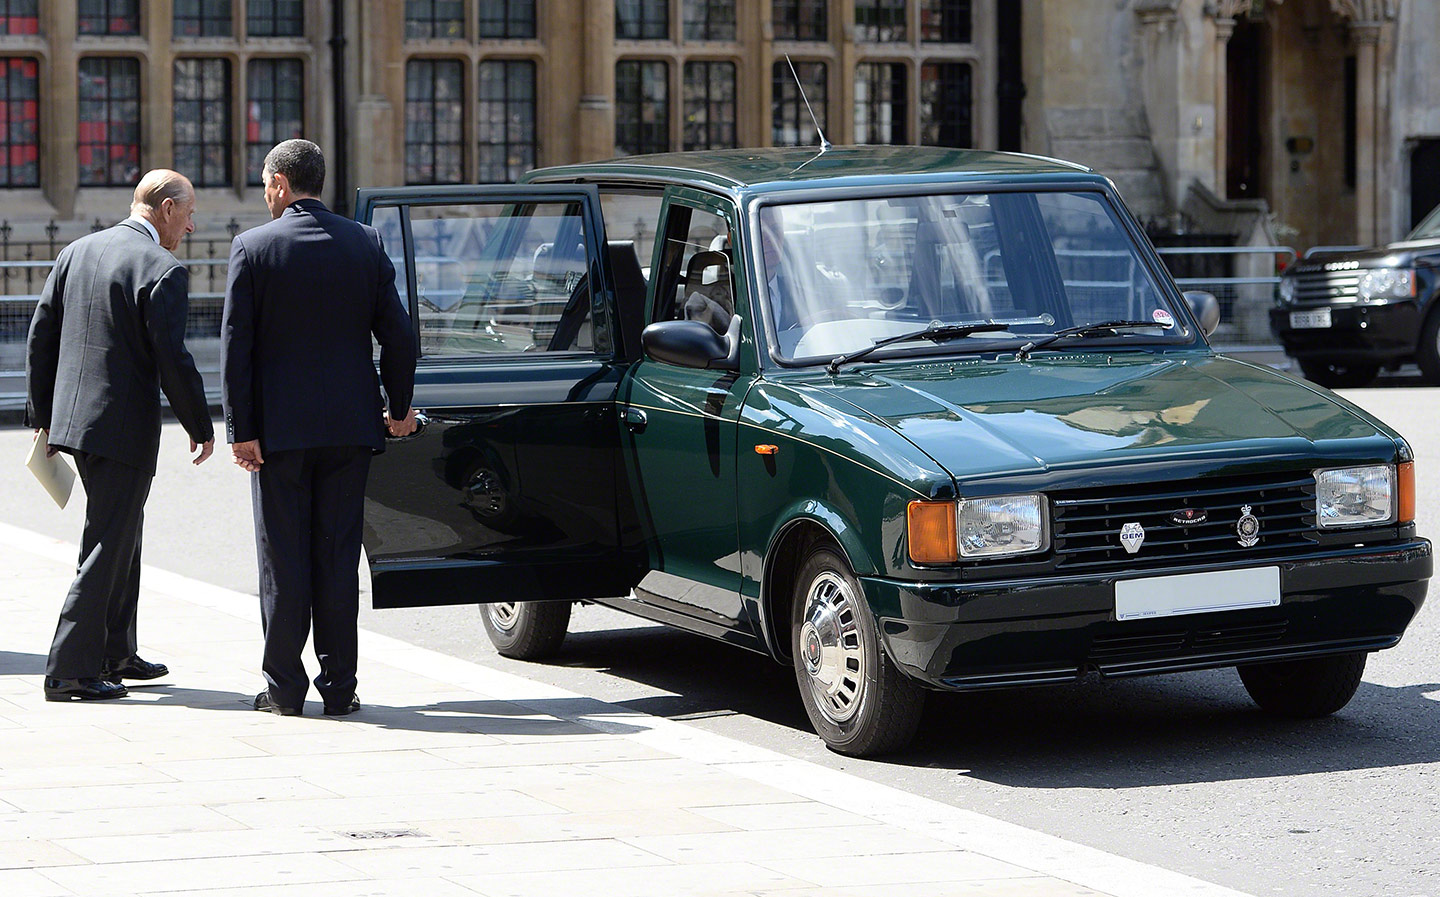 Prince Philip gives up his personal Metrocab taxi